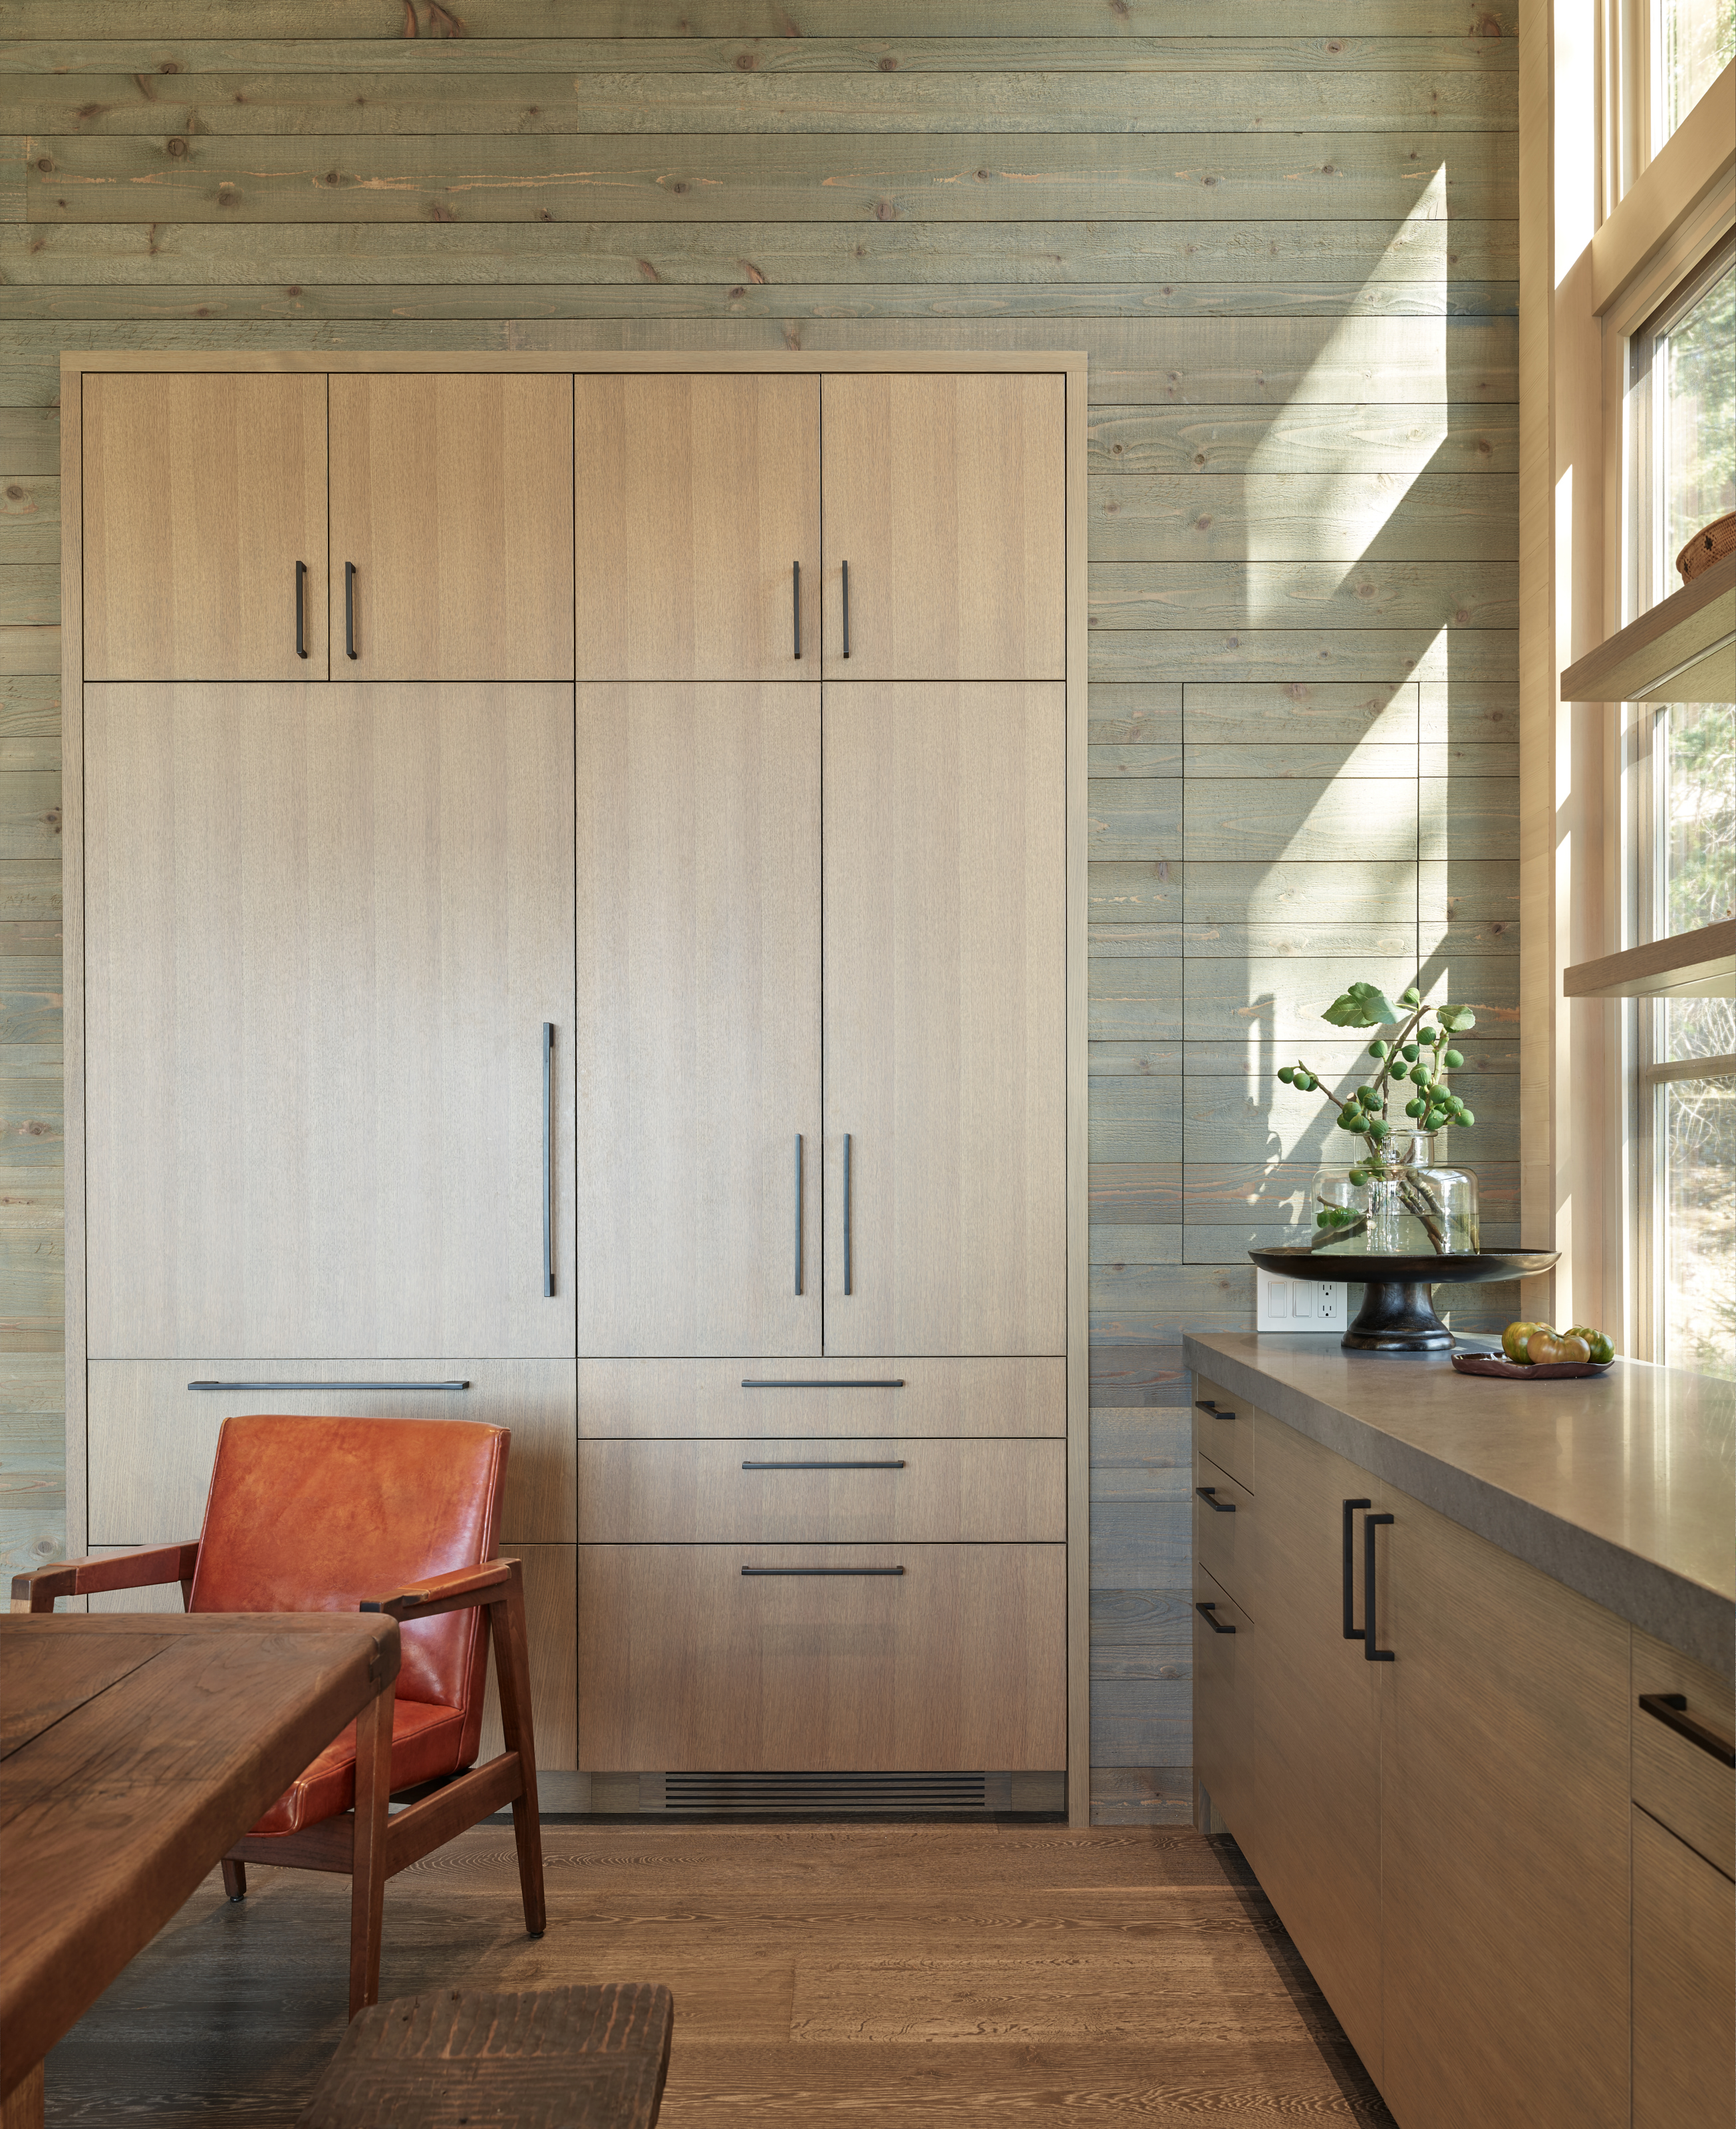 The cabinets and concealed refrigerator are wrapped in various types of wood, adding warmth and texture to the kitchen space.